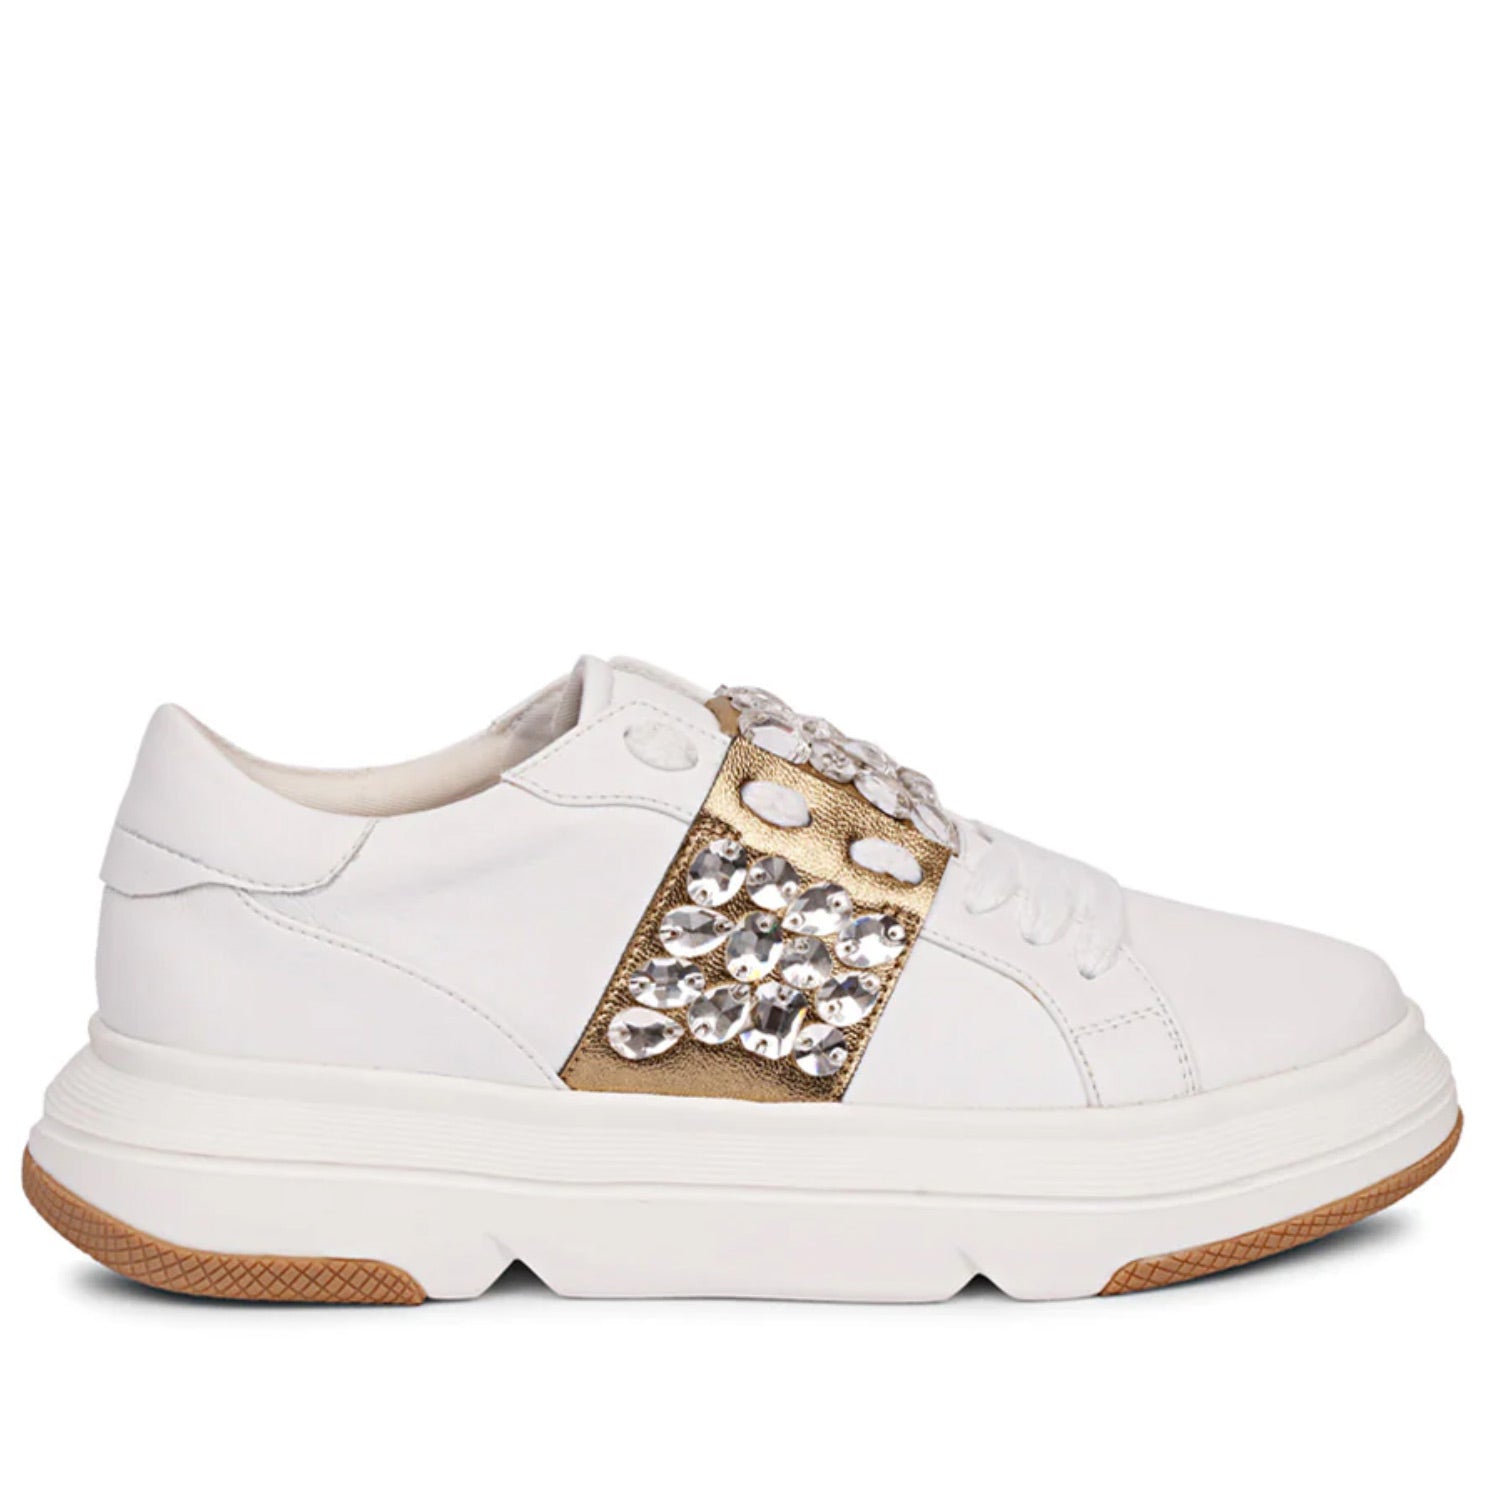 Whitesta Joanna Crystal Off White Leather Sneakers - Elegant off-white sneakers with crystal embellishments for a touch of glamour and timeless style.